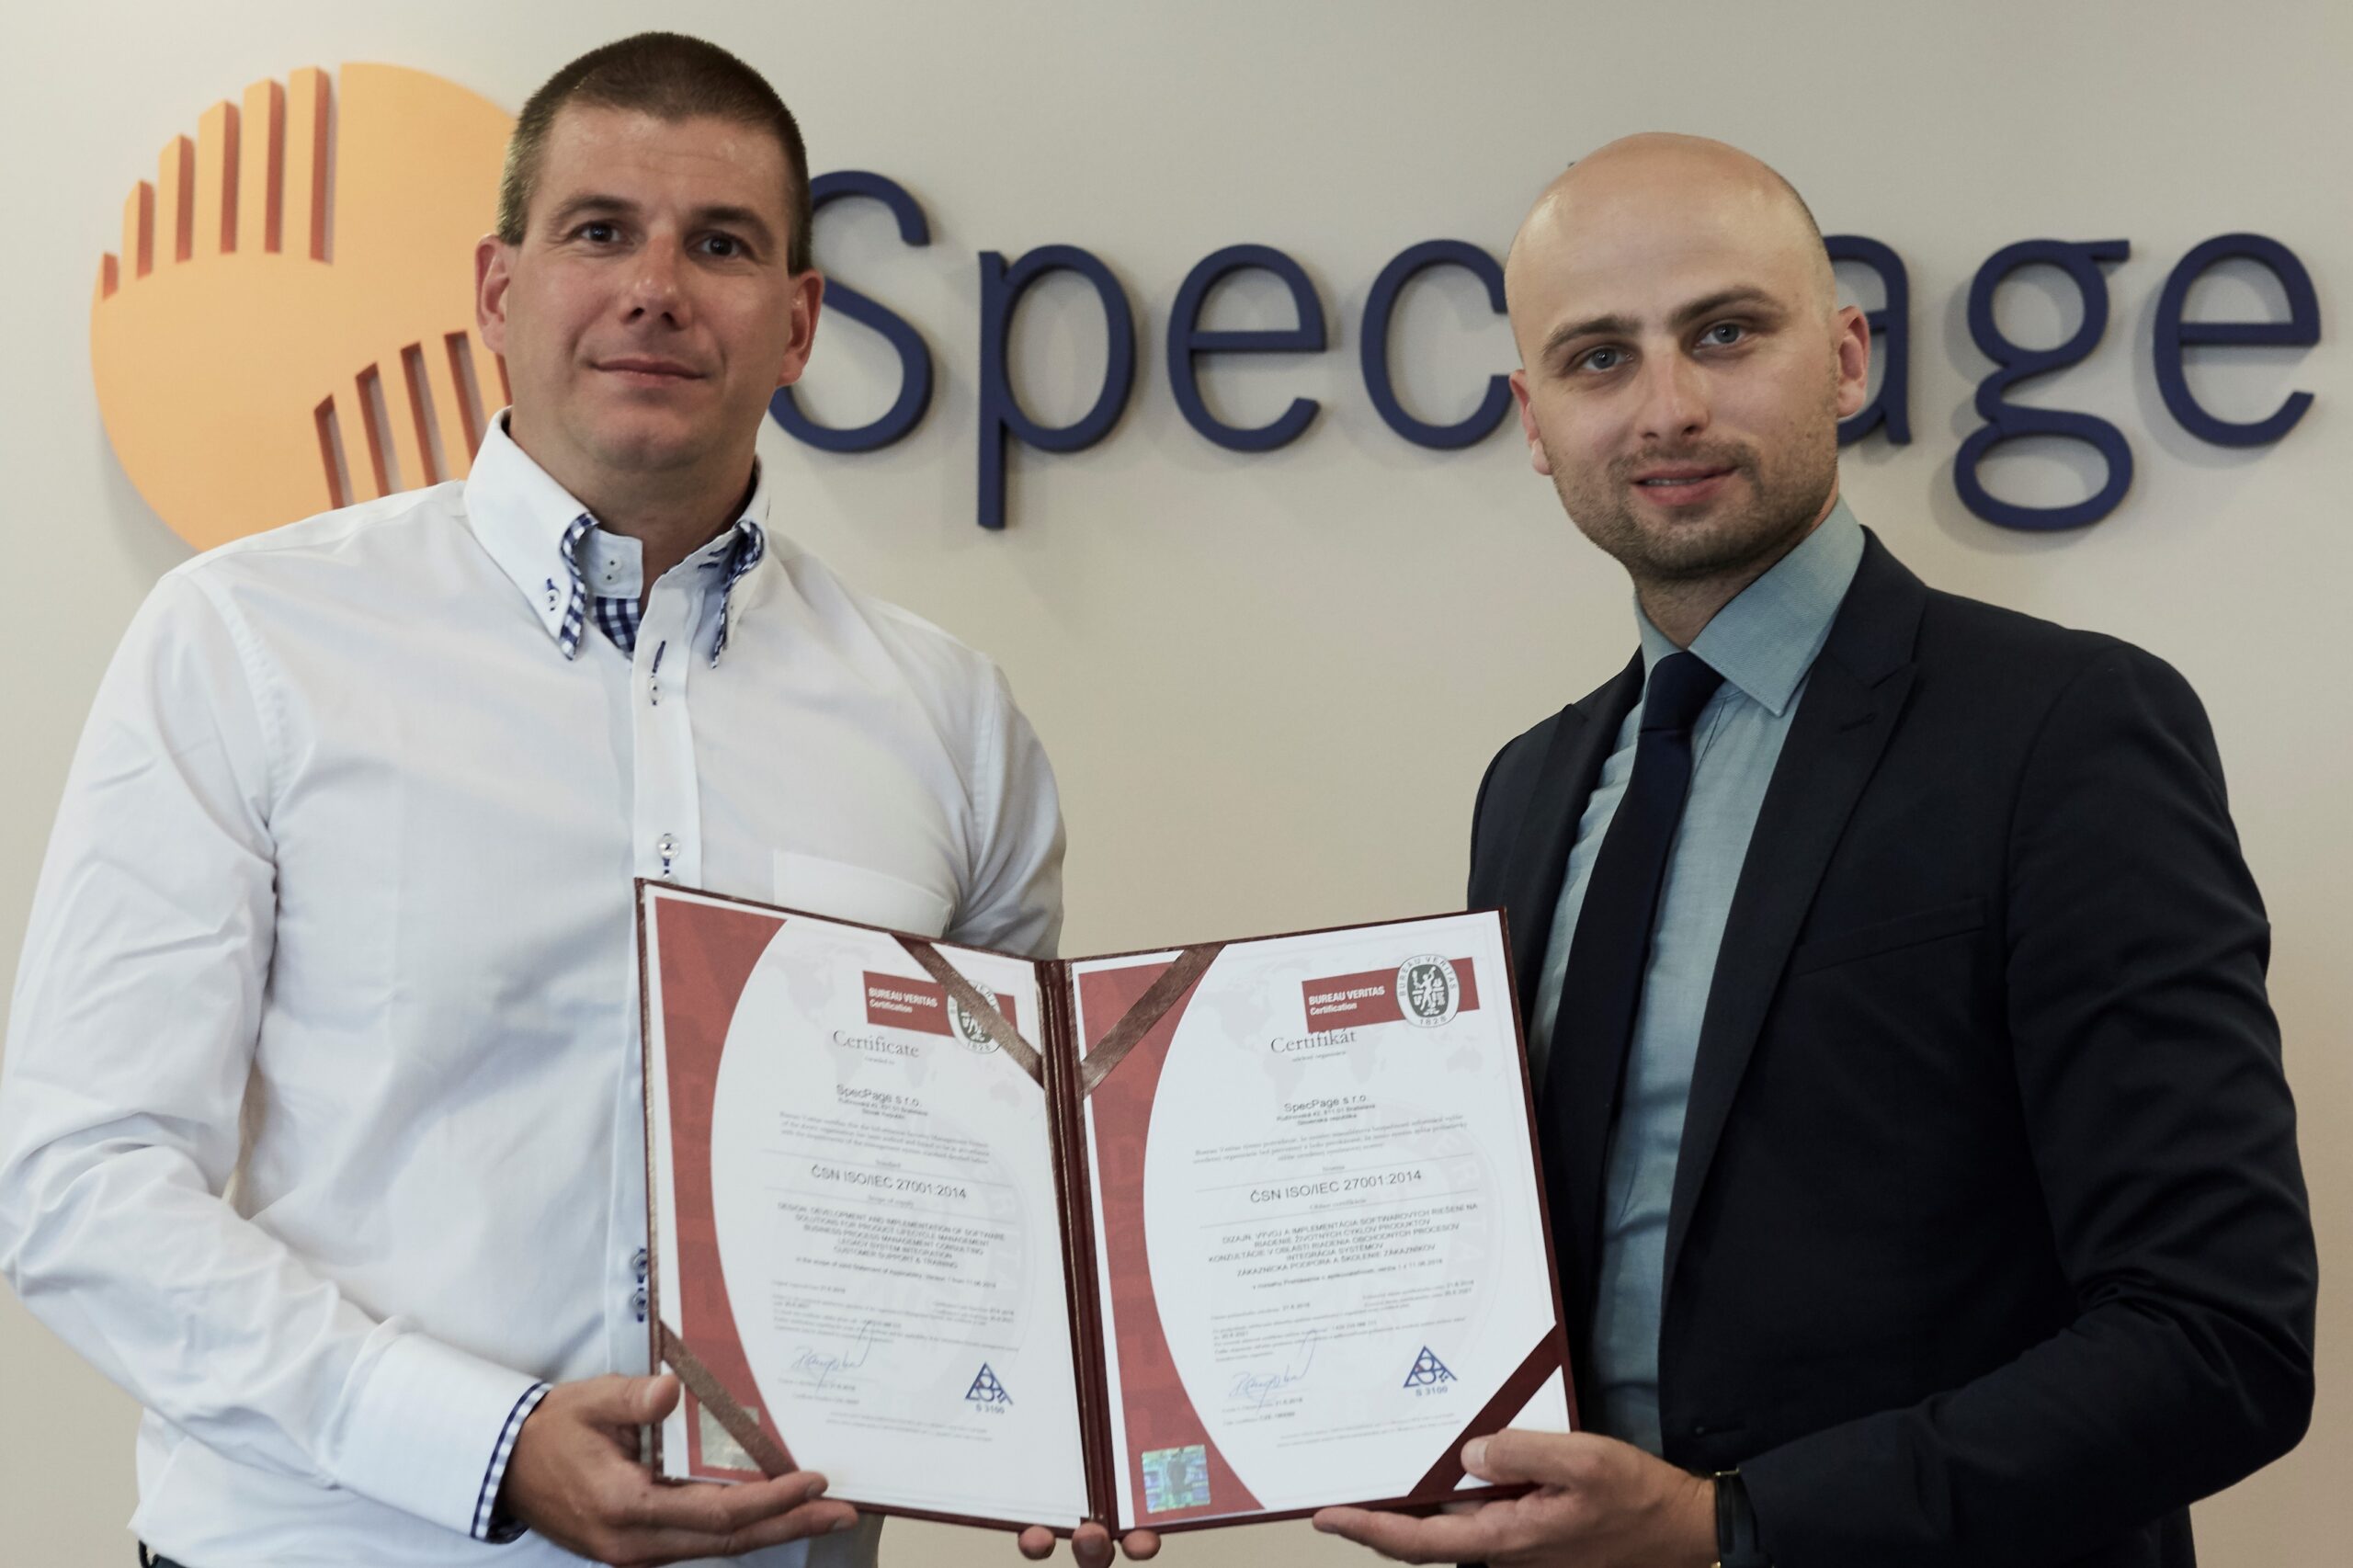 You are currently viewing SpecPage Earns Coveted ISO 27001 Certification from Bureau Veritas Group